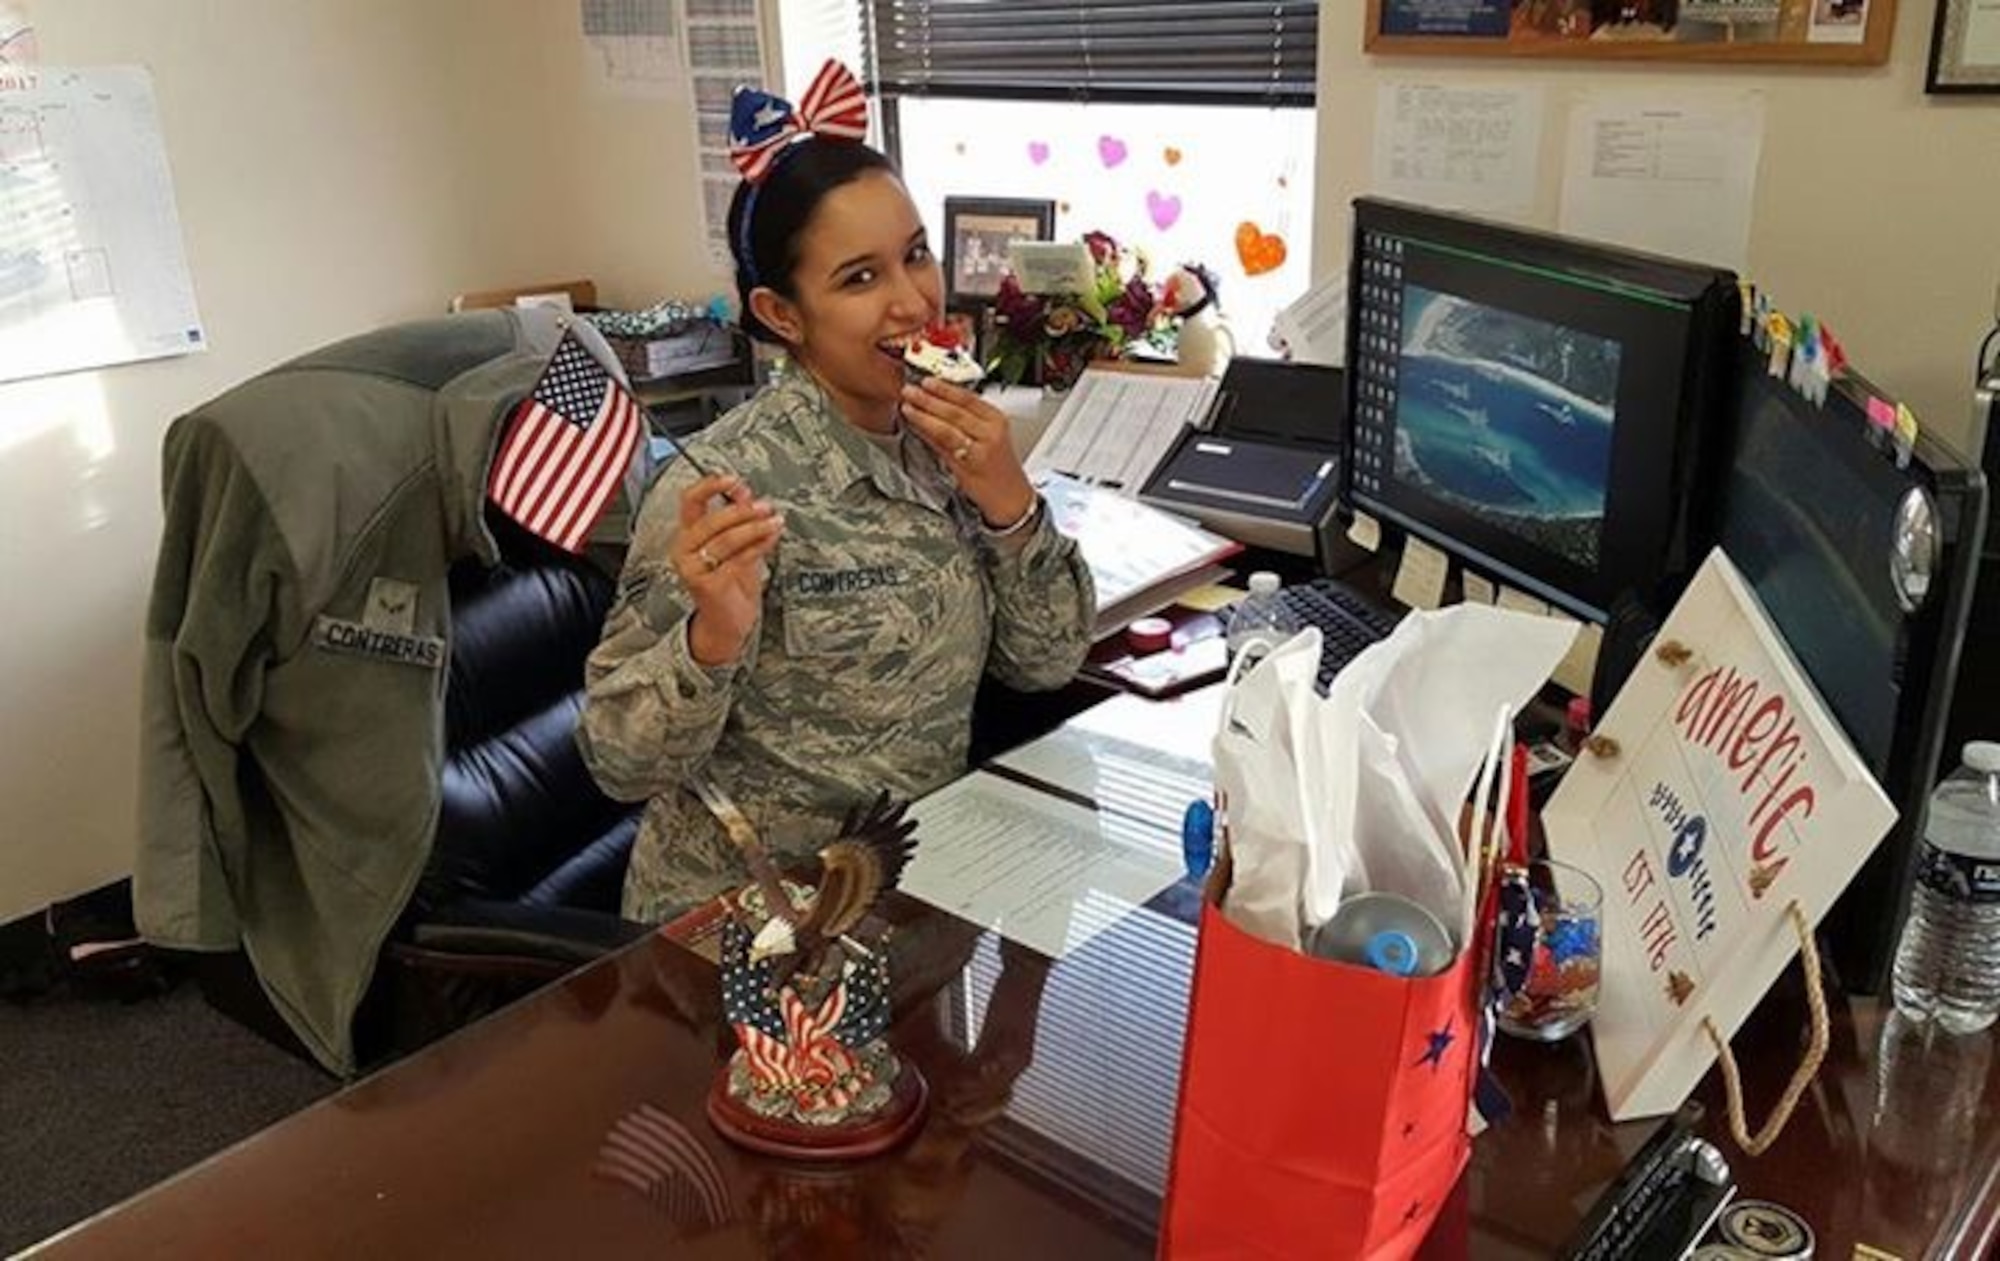 U.S. Air Force Airman 1st Class Alicia “Alice” Contreras, 7th Bomb Wing paralegal gained U.S. citizenship Feb. 7, 2017. When she returned to work, Contreras found that her coworkers had decorated her desk with “Americana” decorations to celebrate her accomplishment and dedication to earning it. (Courtesy photo)